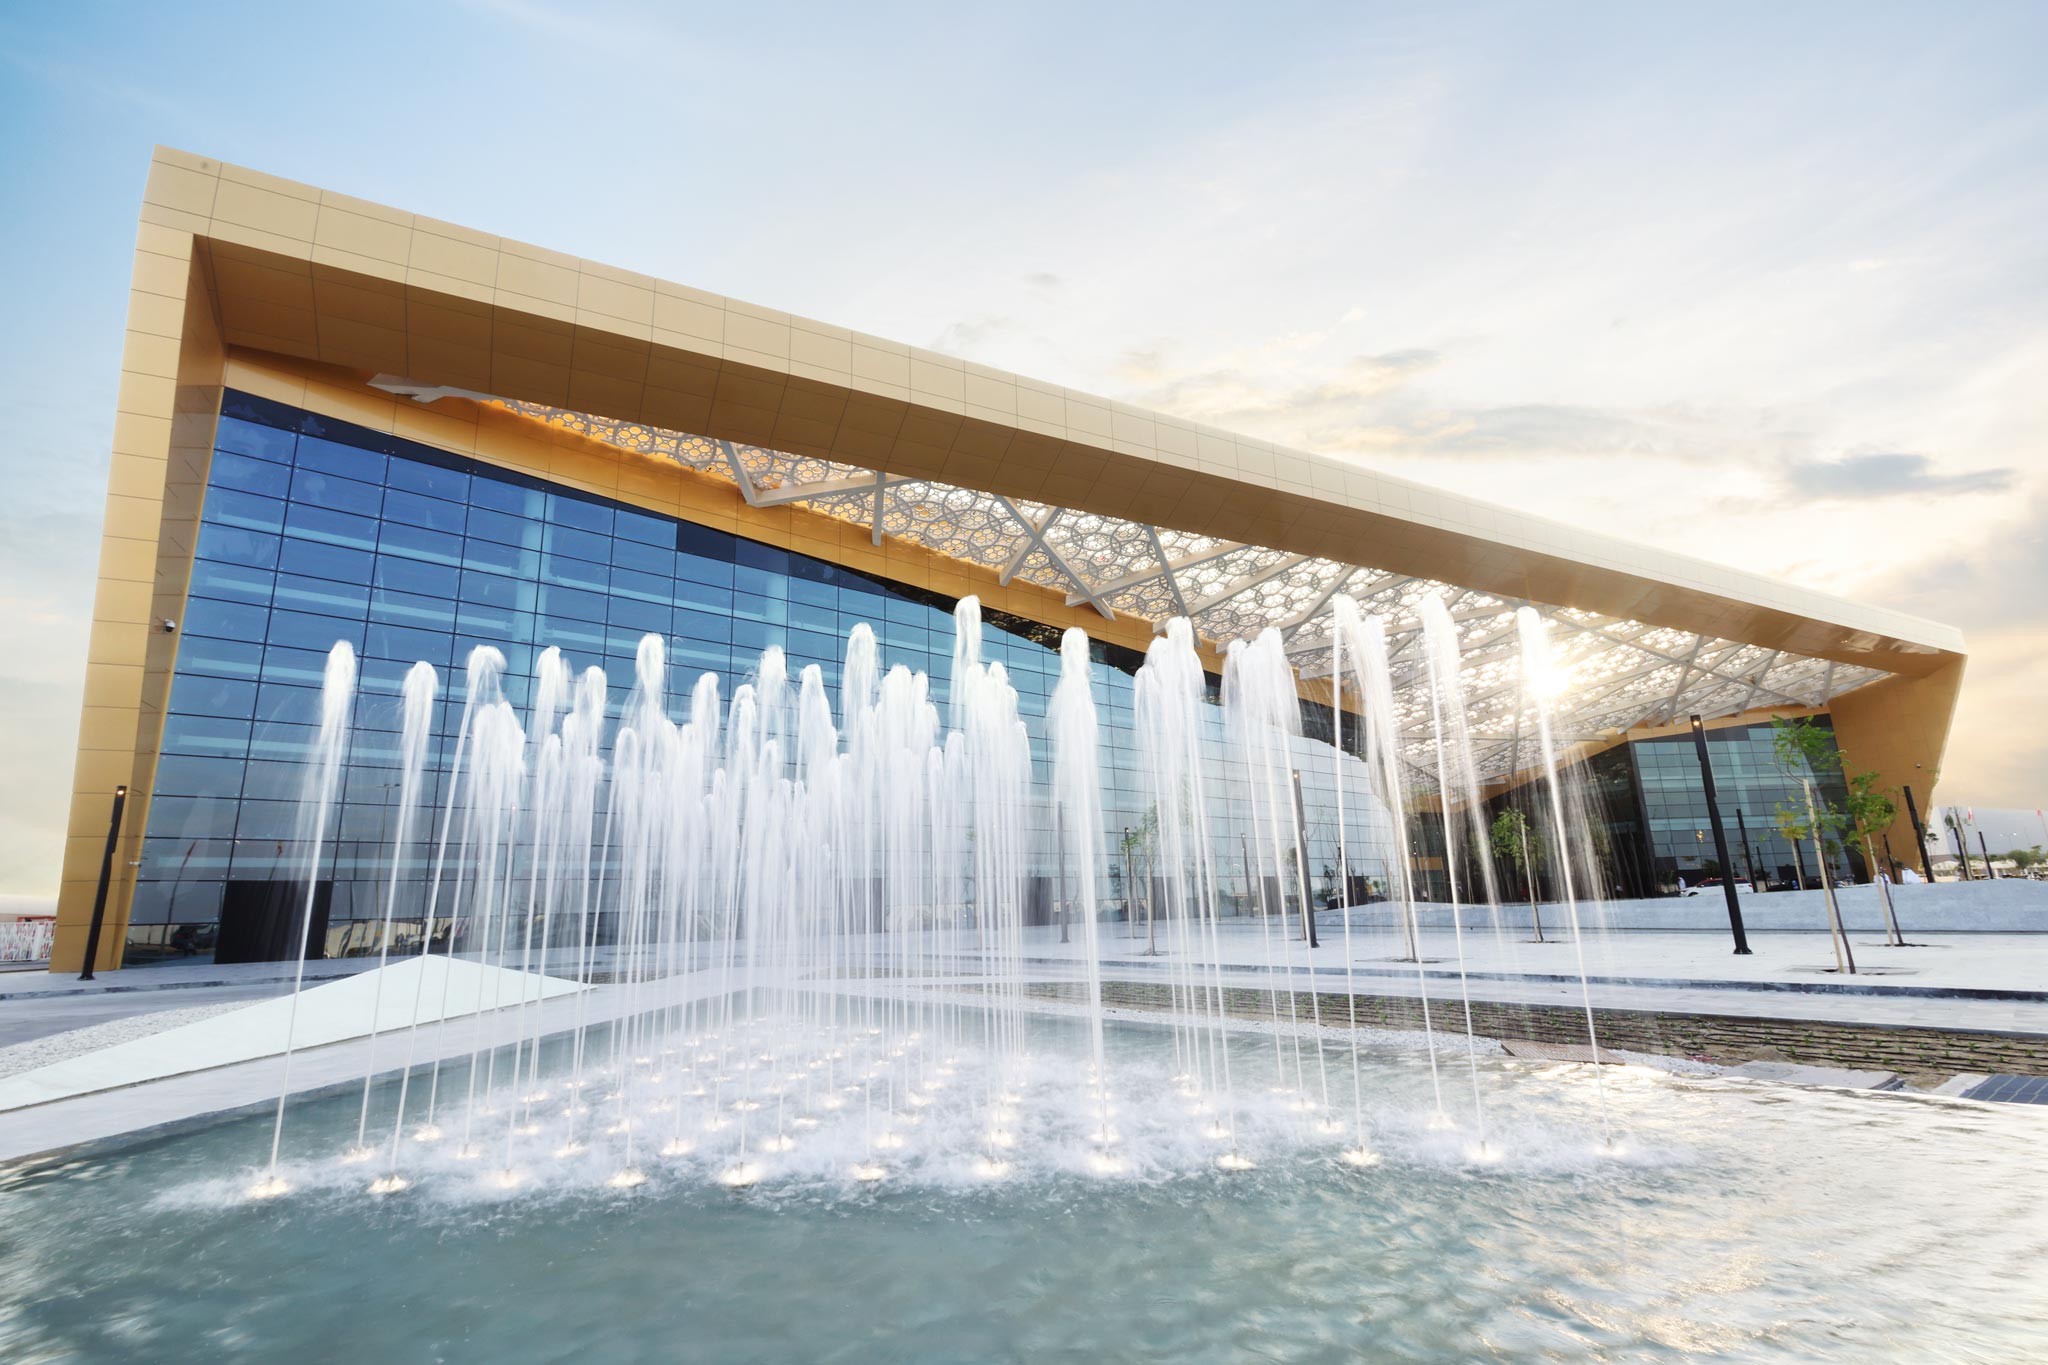 Modern venue with huge glass walls, with a fountain in the foreground.